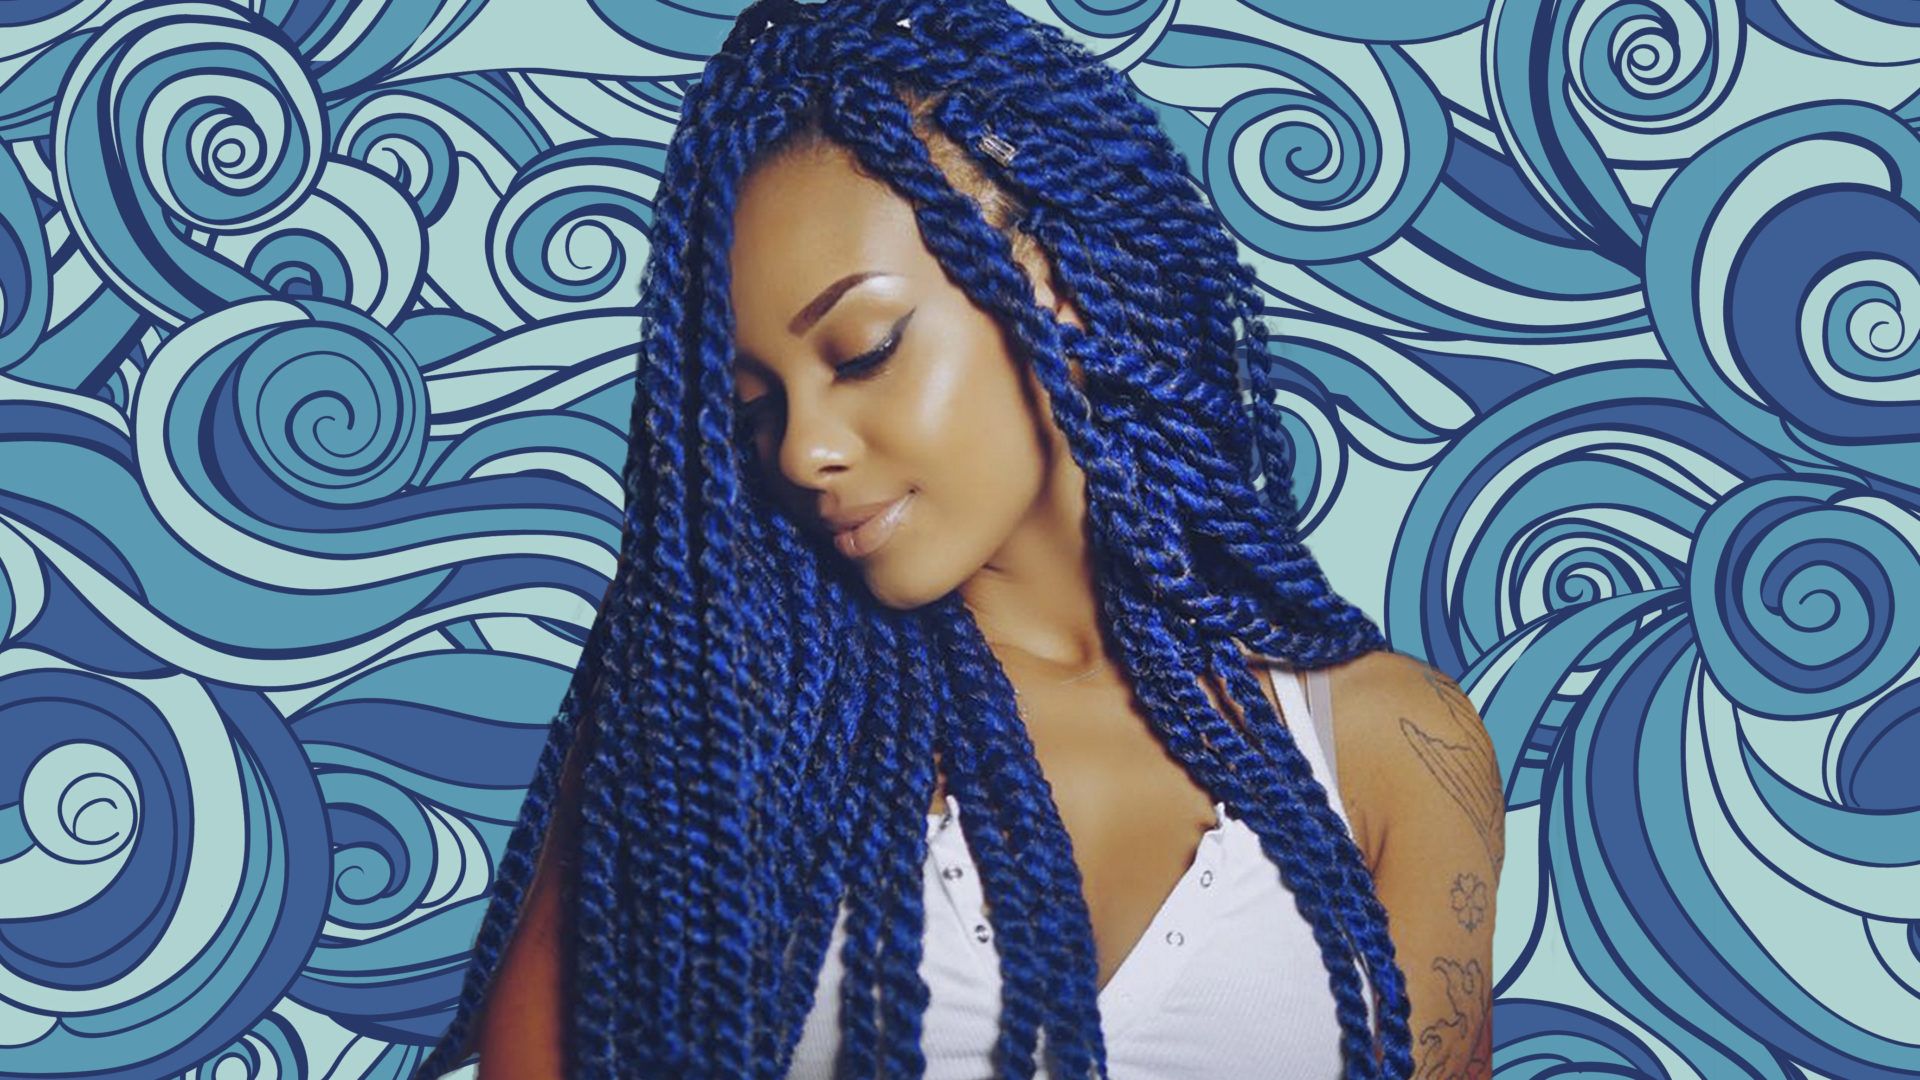 Yarn Twists Inspiration – Essence Pertaining To Latest Colorful Yarn Braid Hairstyles (View 17 of 20)